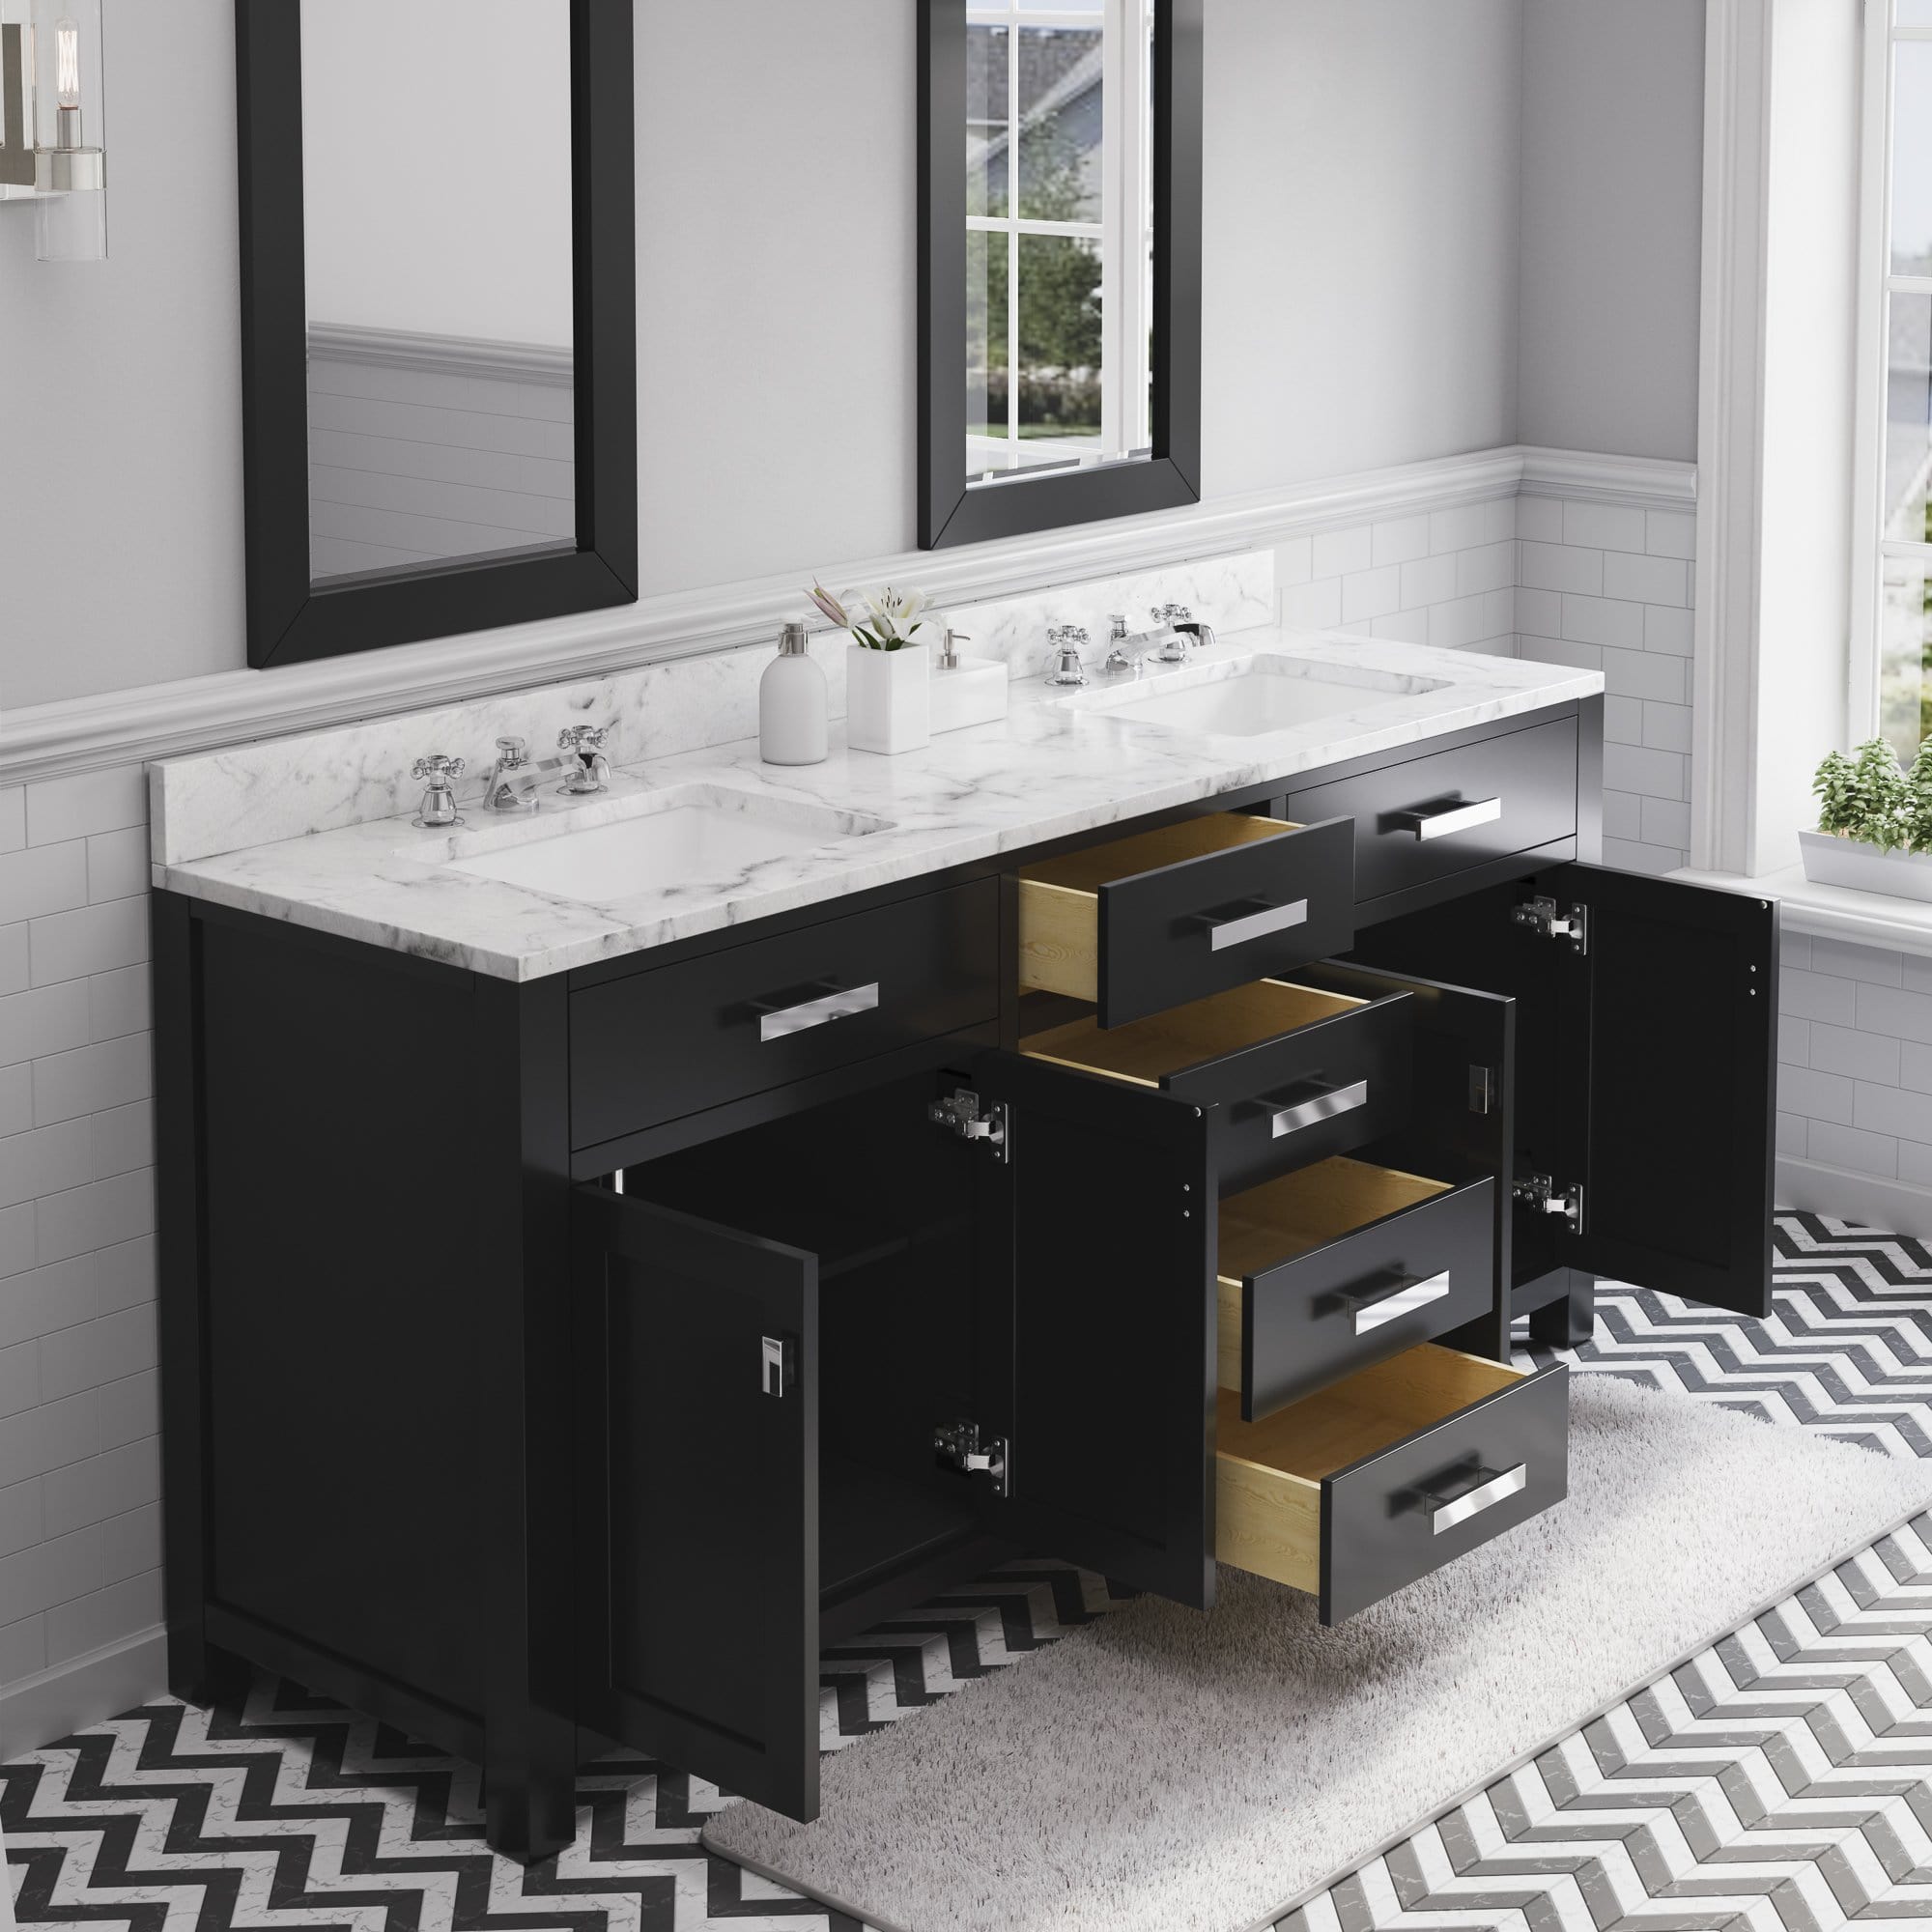 Water Creation 72 Inch Espresso Double Sink Bathroom Vanity From The Madison Collection - Molaix700621682721Bathroom vanityMS72CW01ES-000000000